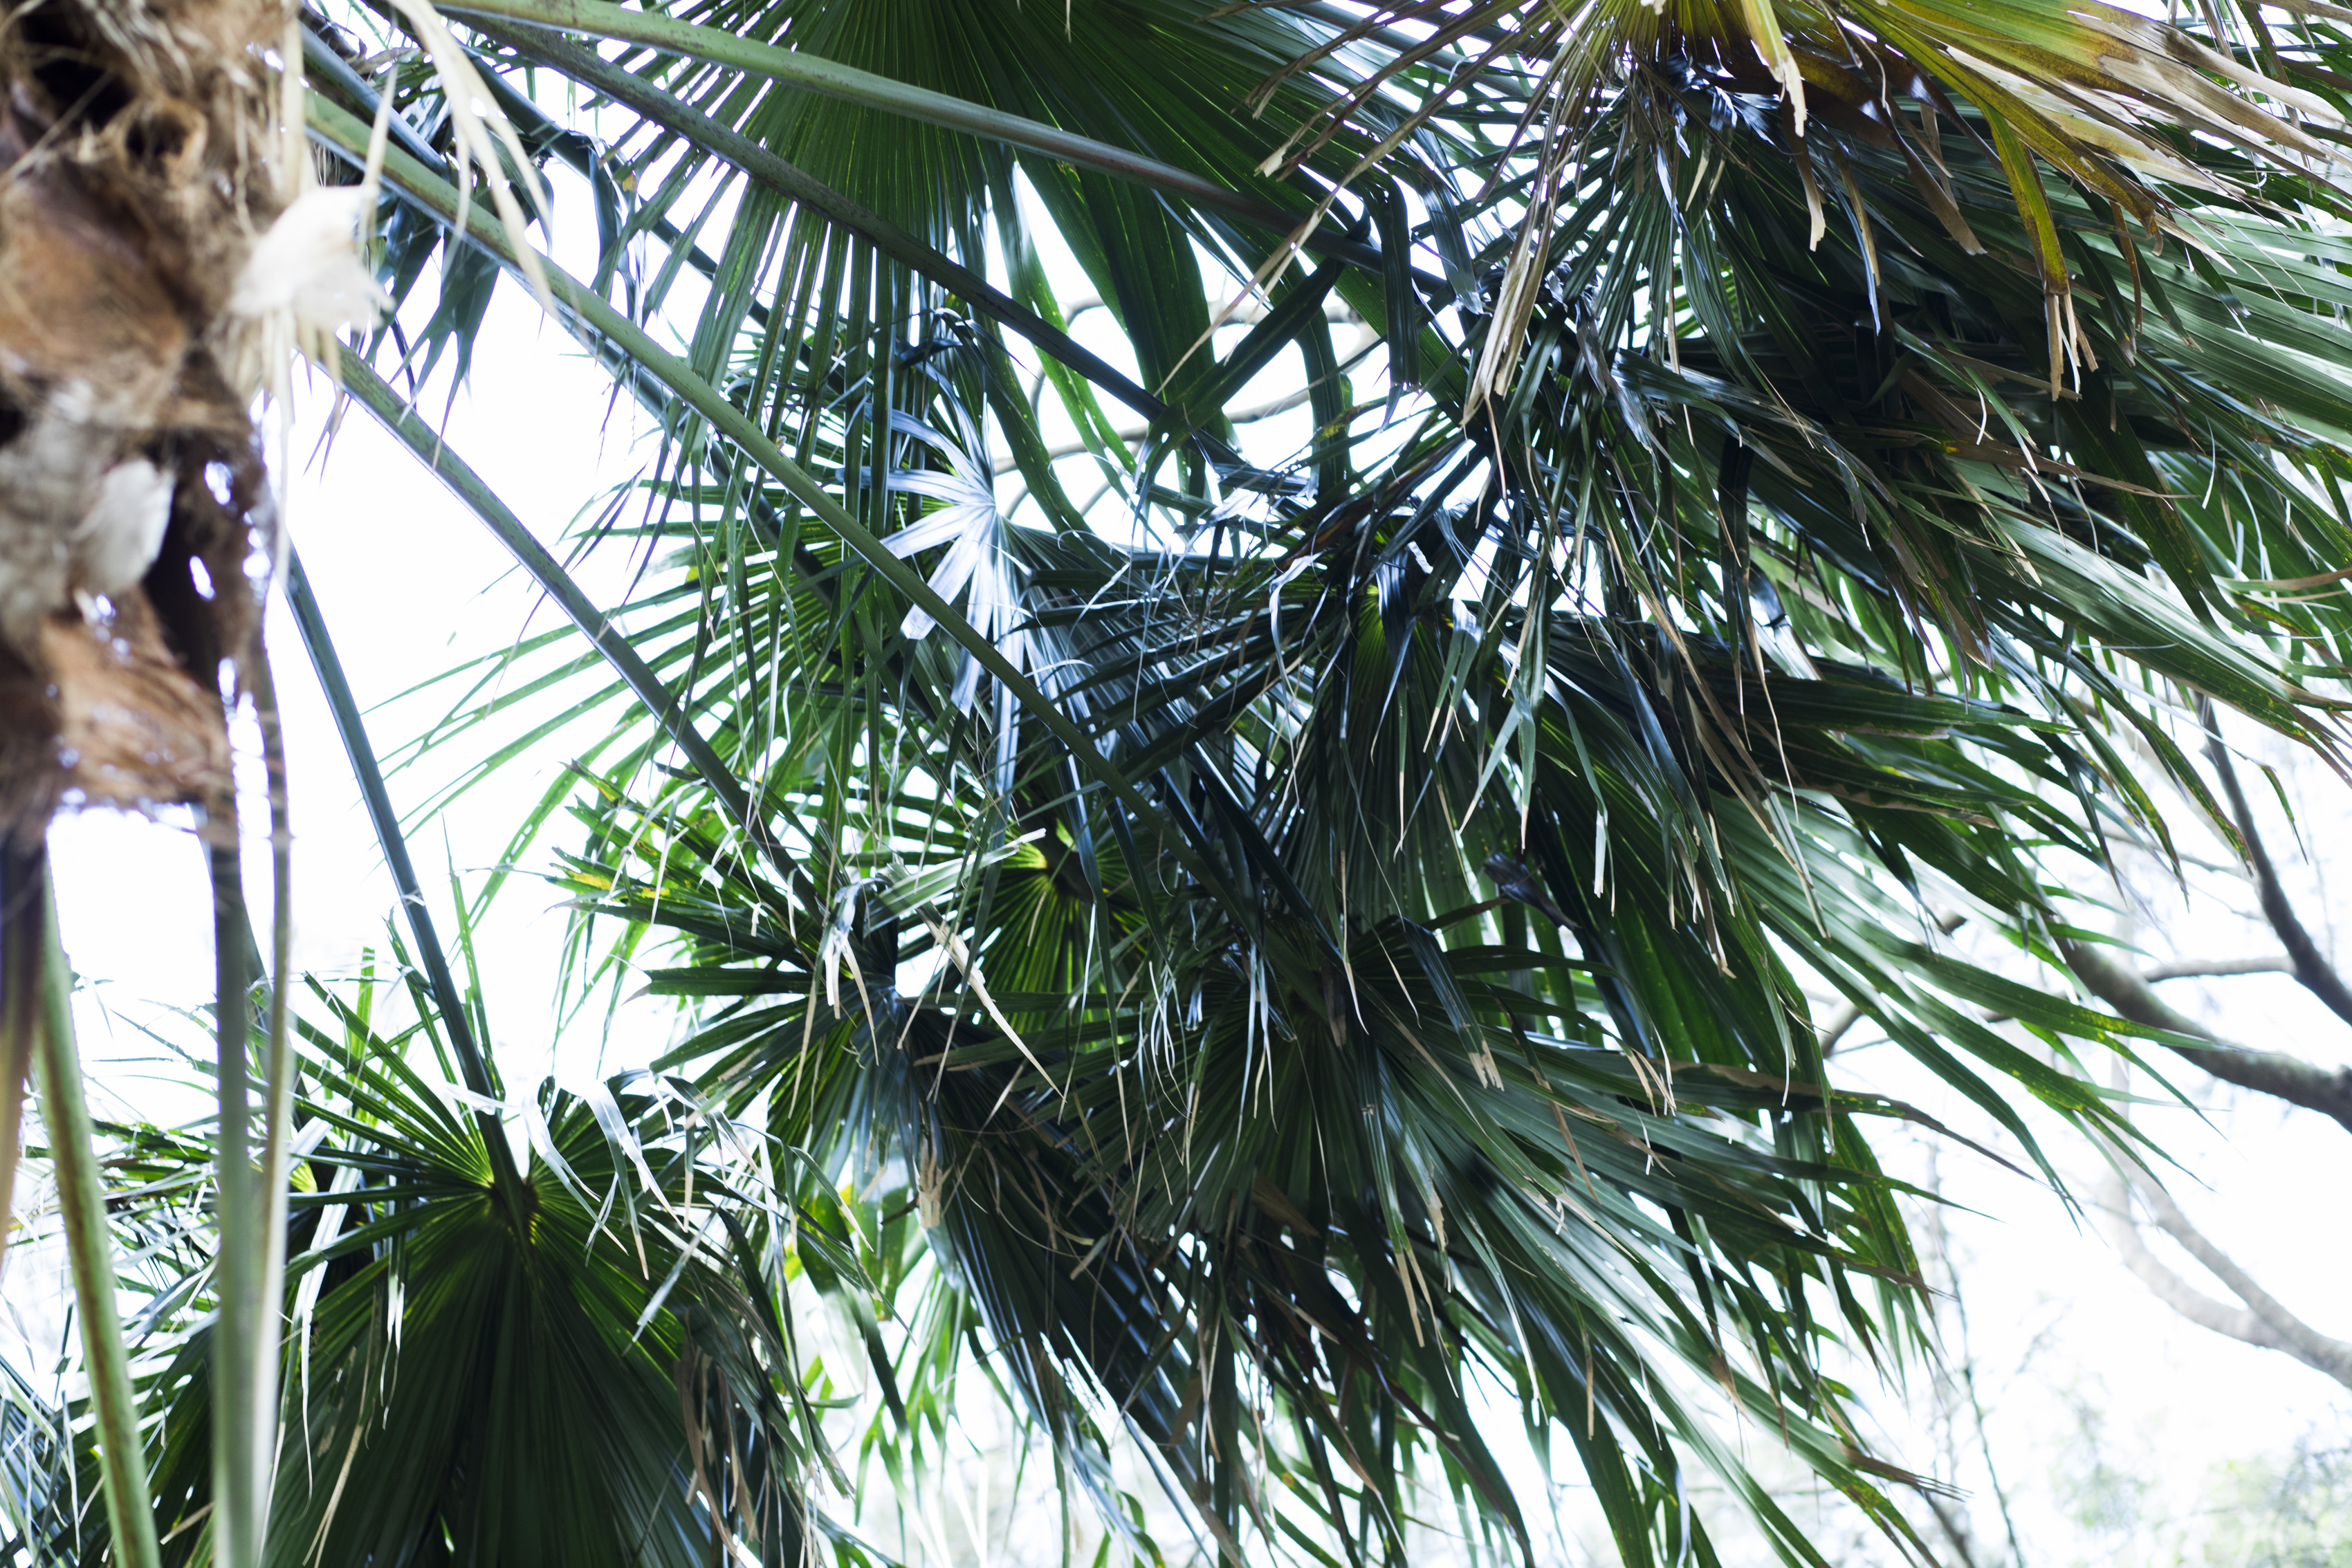 Close-up photograph of a cabbage tree palm and its fronds